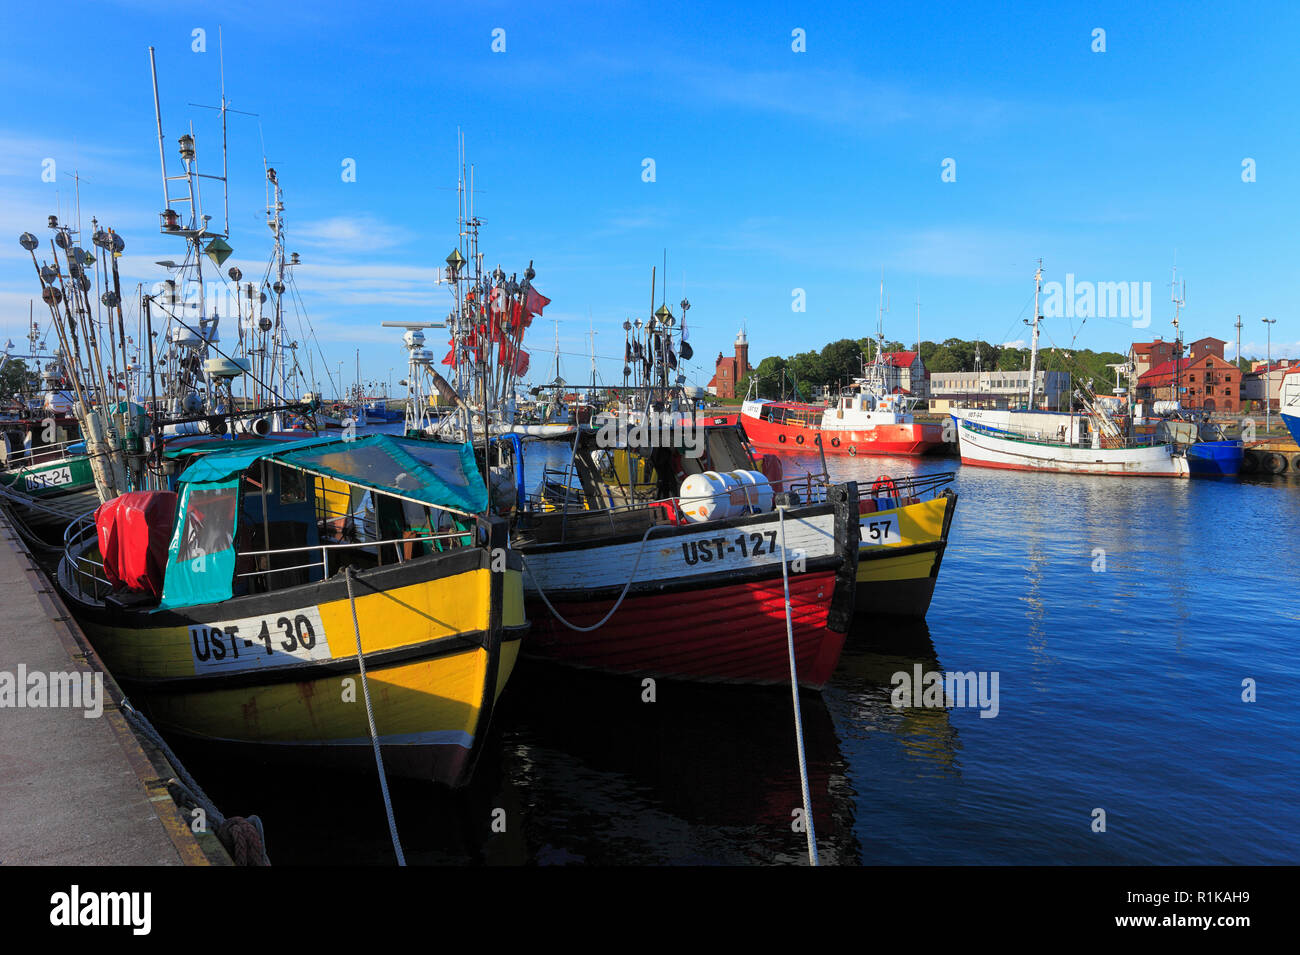 Ustka, Pomerania / Poland - 2009/07/02: Ustka fishing port with cutters and peers at the Baltic Sea shoreline Stock Photo